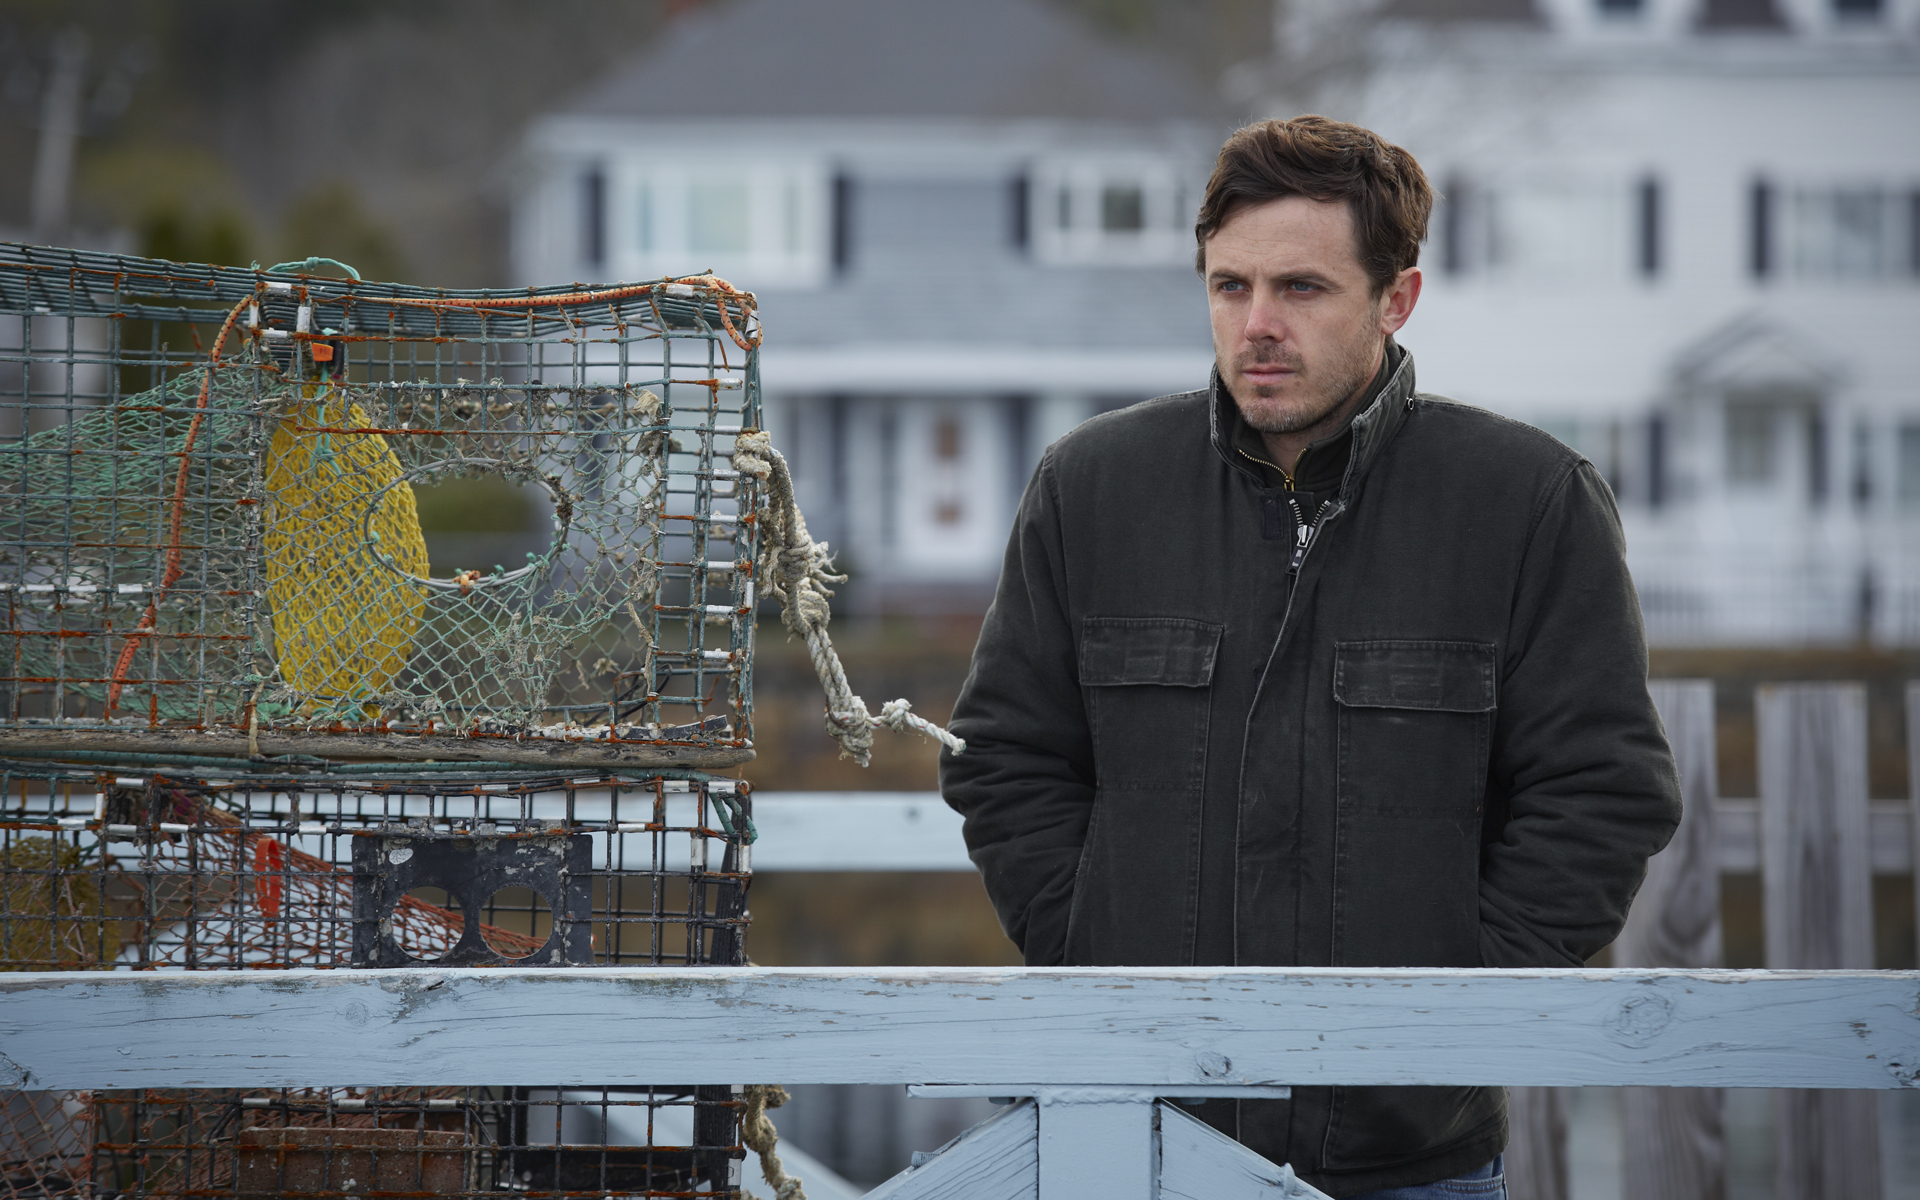 Manchester by the Sea ©2015 Affleck/Middleton, K Period